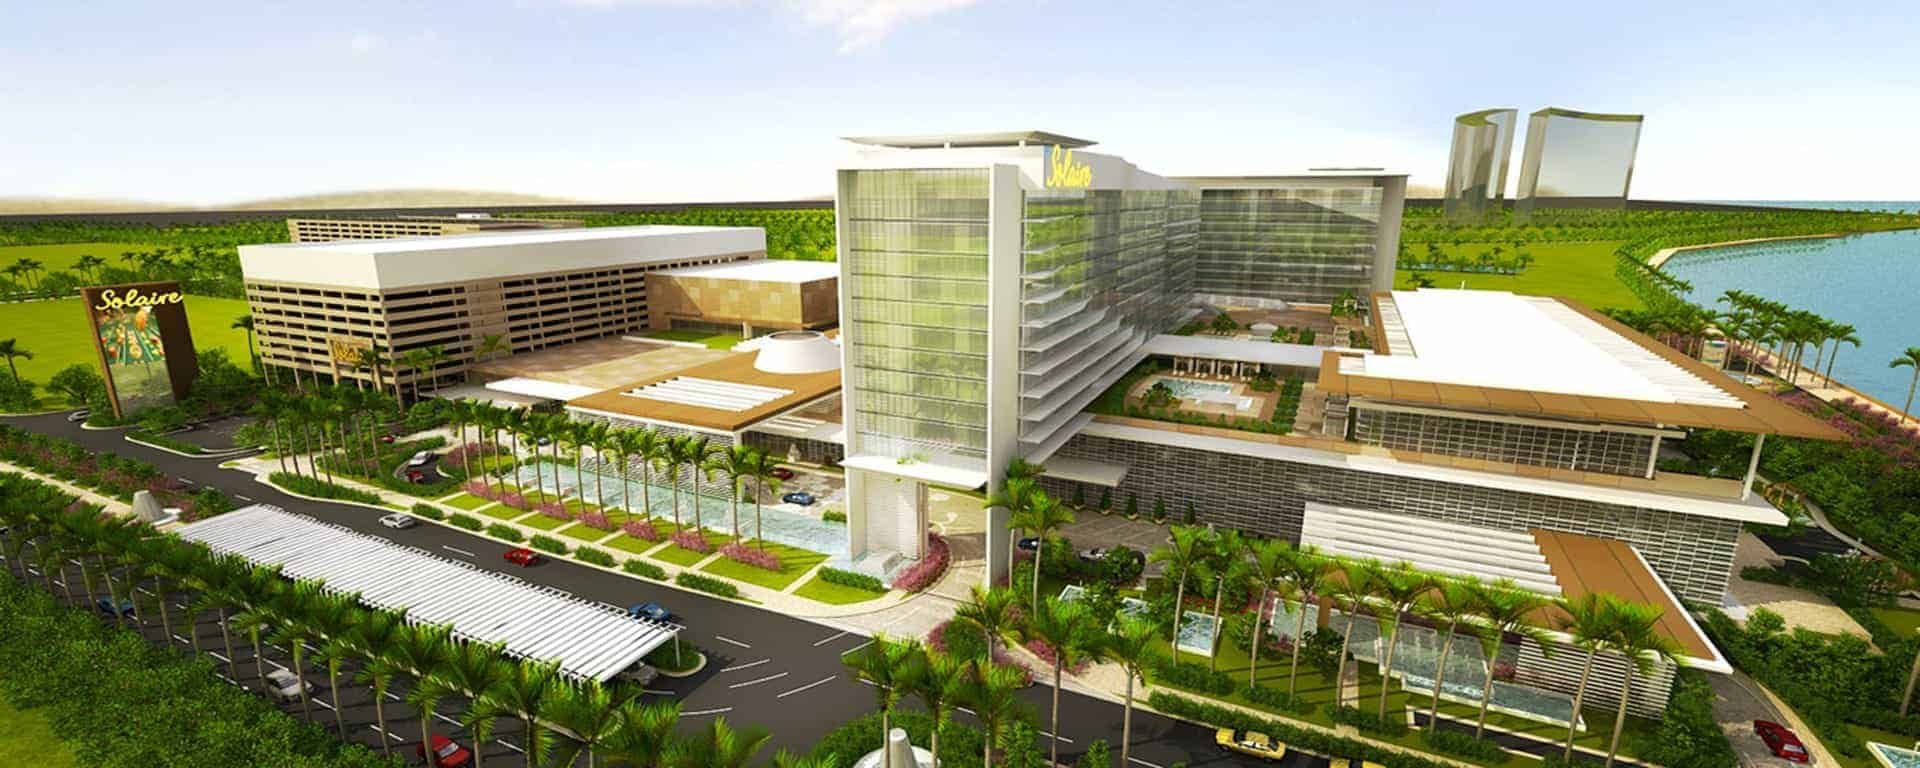 SOLAIRE RESORT AND CASINO - RLB